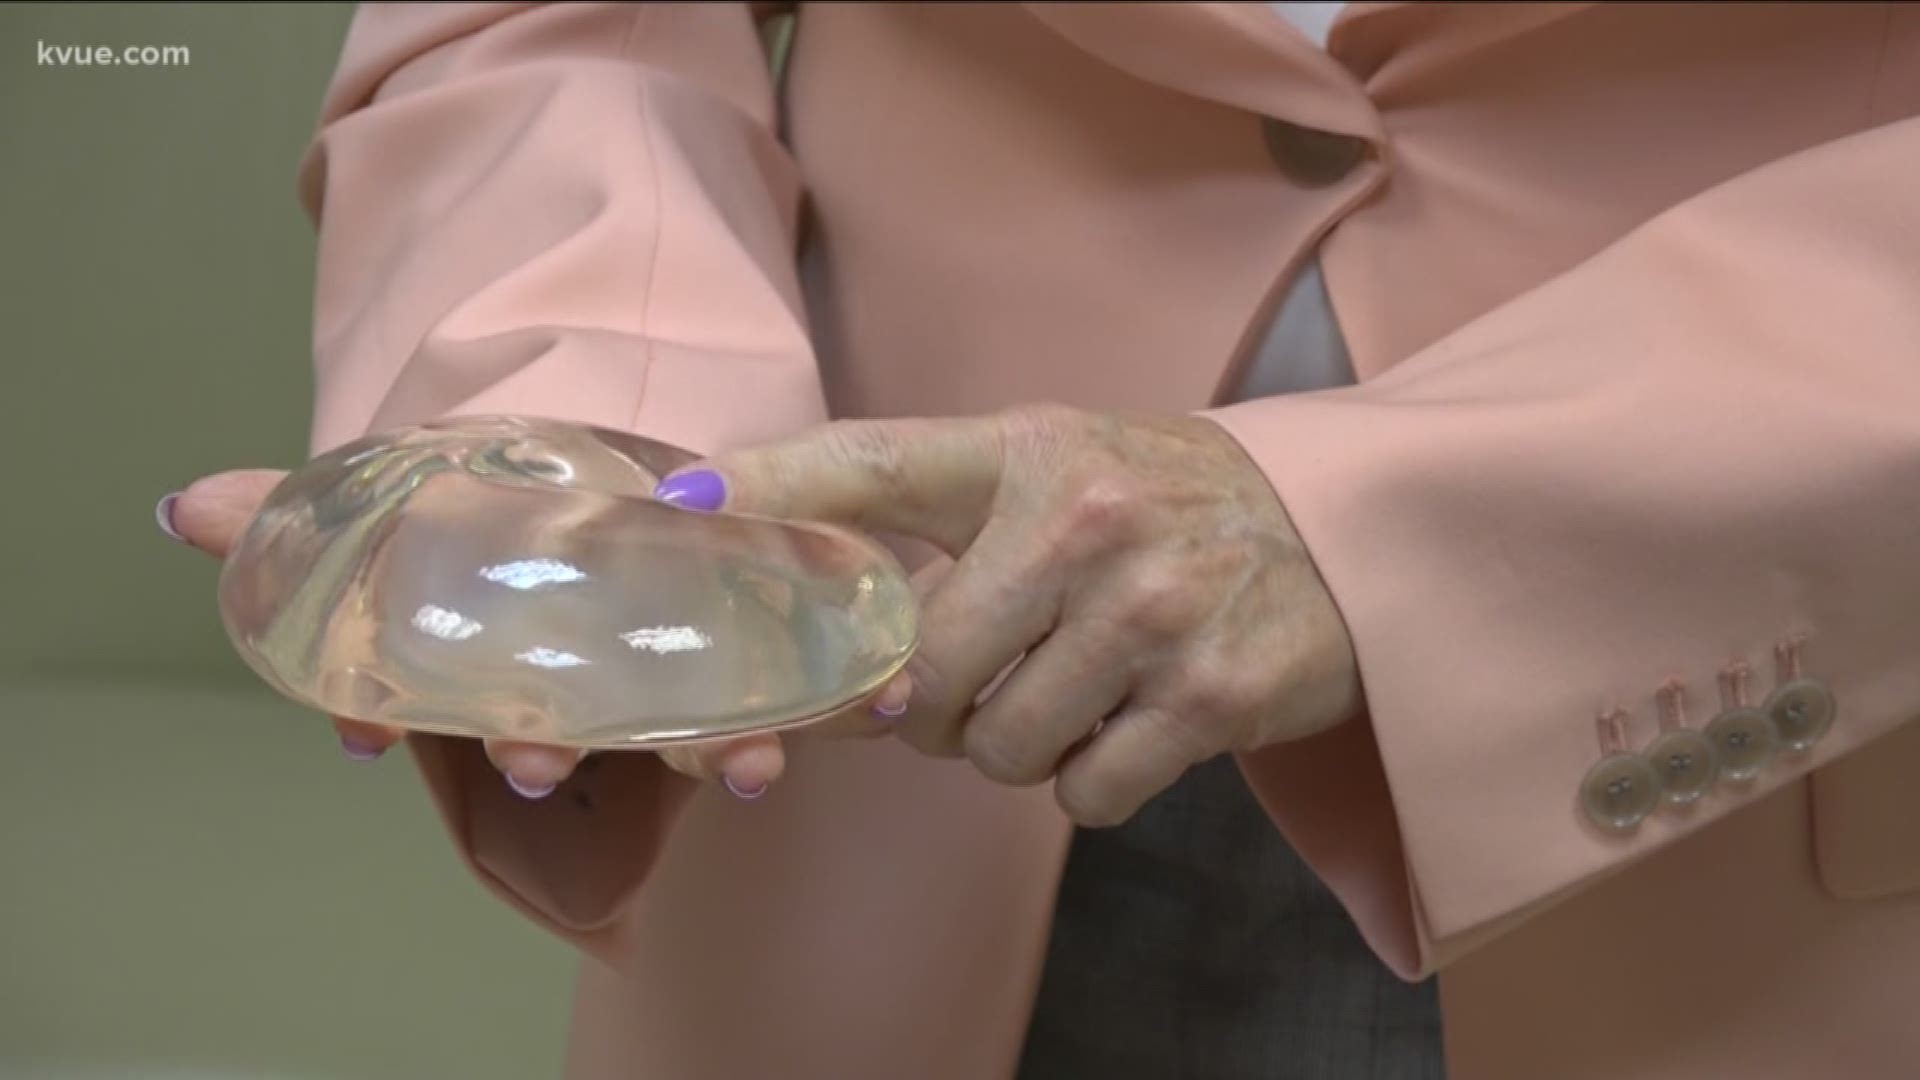 The FDA reports cases of cancer associated with breast implants has gone up. Here's what you should watch out for.